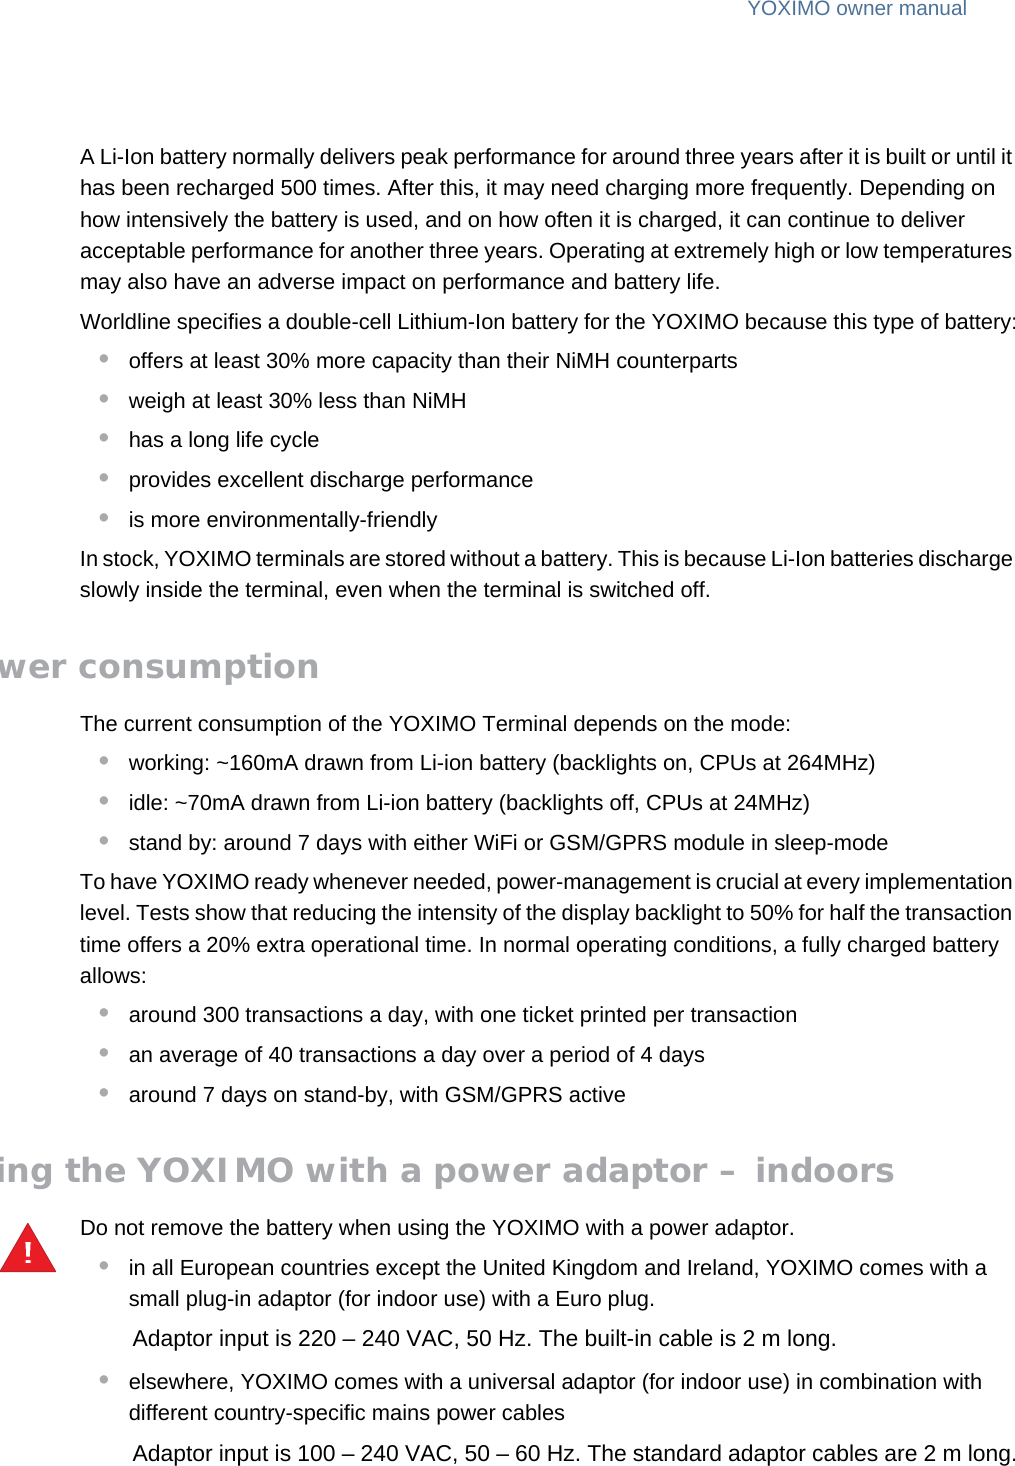 YOXIMO owner manual20  publiclast updated 30/9/15 document release 1.1 om_yxm_powerSupply.fmA Li-Ion battery normally delivers peak performance for around three years after it is built or until it has been recharged 500 times. After this, it may need charging more frequently. Depending on how intensively the battery is used, and on how often it is charged, it can continue to deliver acceptable performance for another three years. Operating at extremely high or low temperatures may also have an adverse impact on performance and battery life.Worldline specifies a double-cell Lithium-Ion battery for the YOXIMO because this type of battery:•offers at least 30% more capacity than their NiMH counterparts•weigh at least 30% less than NiMH•has a long life cycle•provides excellent discharge performance•is more environmentally-friendlyIn stock, YOXIMO terminals are stored without a battery. This is because Li-Ion batteries discharge slowly inside the terminal, even when the terminal is switched off.Power consumptionThe current consumption of the YOXIMO Terminal depends on the mode:•working: ~160mA drawn from Li-ion battery (backlights on, CPUs at 264MHz)•idle: ~70mA drawn from Li-ion battery (backlights off, CPUs at 24MHz)•stand by: around 7 days with either WiFi or GSM/GPRS module in sleep-modeTo have YOXIMO ready whenever needed, power-management is crucial at every implementation level. Tests show that reducing the intensity of the display backlight to 50% for half the transaction time offers a 20% extra operational time. In normal operating conditions, a fully charged battery allows:•around 300 transactions a day, with one ticket printed per transaction•an average of 40 transactions a day over a period of 4 days•around 7 days on stand-by, with GSM/GPRS activeUsing the YOXIMO with a power adaptor – indoorsDo not remove the battery when using the YOXIMO with a power adaptor.•in all European countries except the United Kingdom and Ireland, YOXIMO comes with a small plug-in adaptor (for indoor use) with a Euro plug.Adaptor input is 220 – 240 VAC, 50 Hz. The built-in cable is 2 m long.•elsewhere, YOXIMO comes with a universal adaptor (for indoor use) in combination with different country-specific mains power cablesAdaptor input is 100 – 240 VAC, 50 – 60 Hz. The standard adaptor cables are 2 m long.!